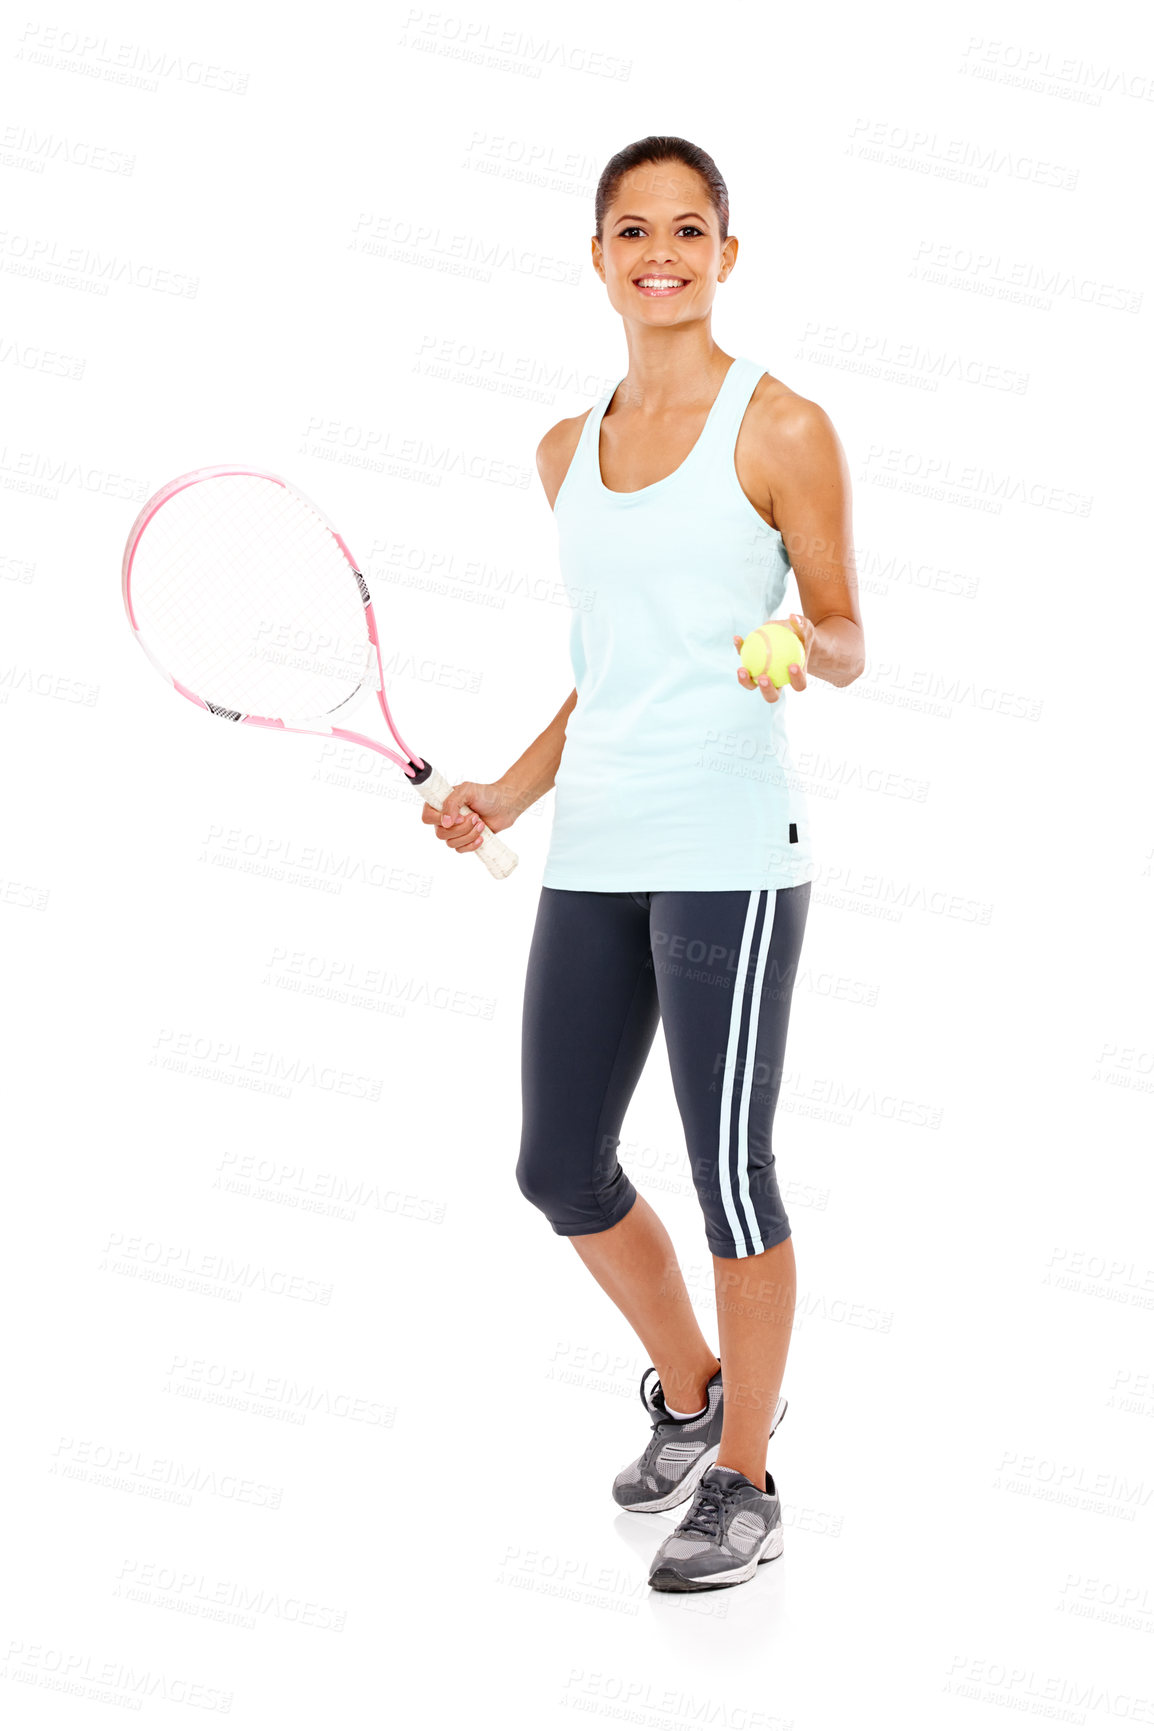 Buy stock photo Full length portrait of a happy young woman ready for her match while holding a tennis racket and ball